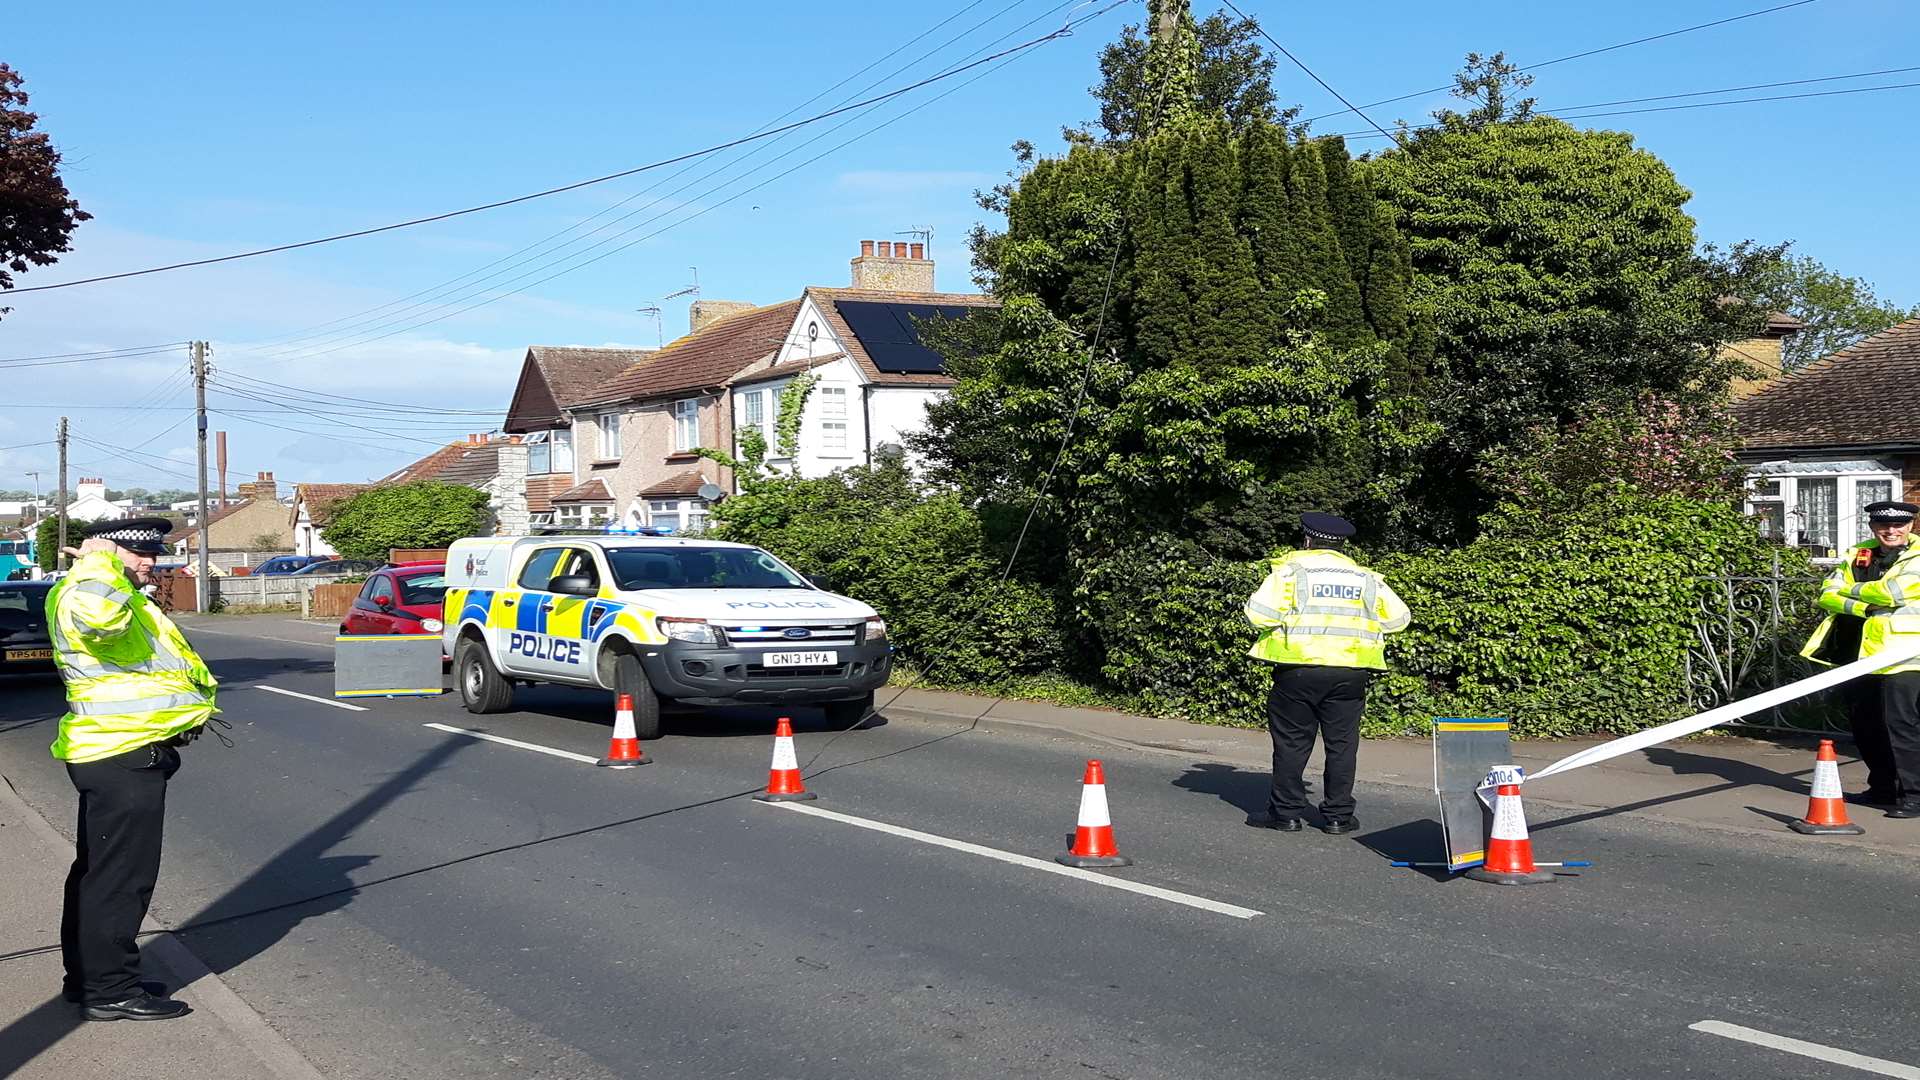 Police direct traffic after a power cable fell across Minster Road, Minster, this morning.